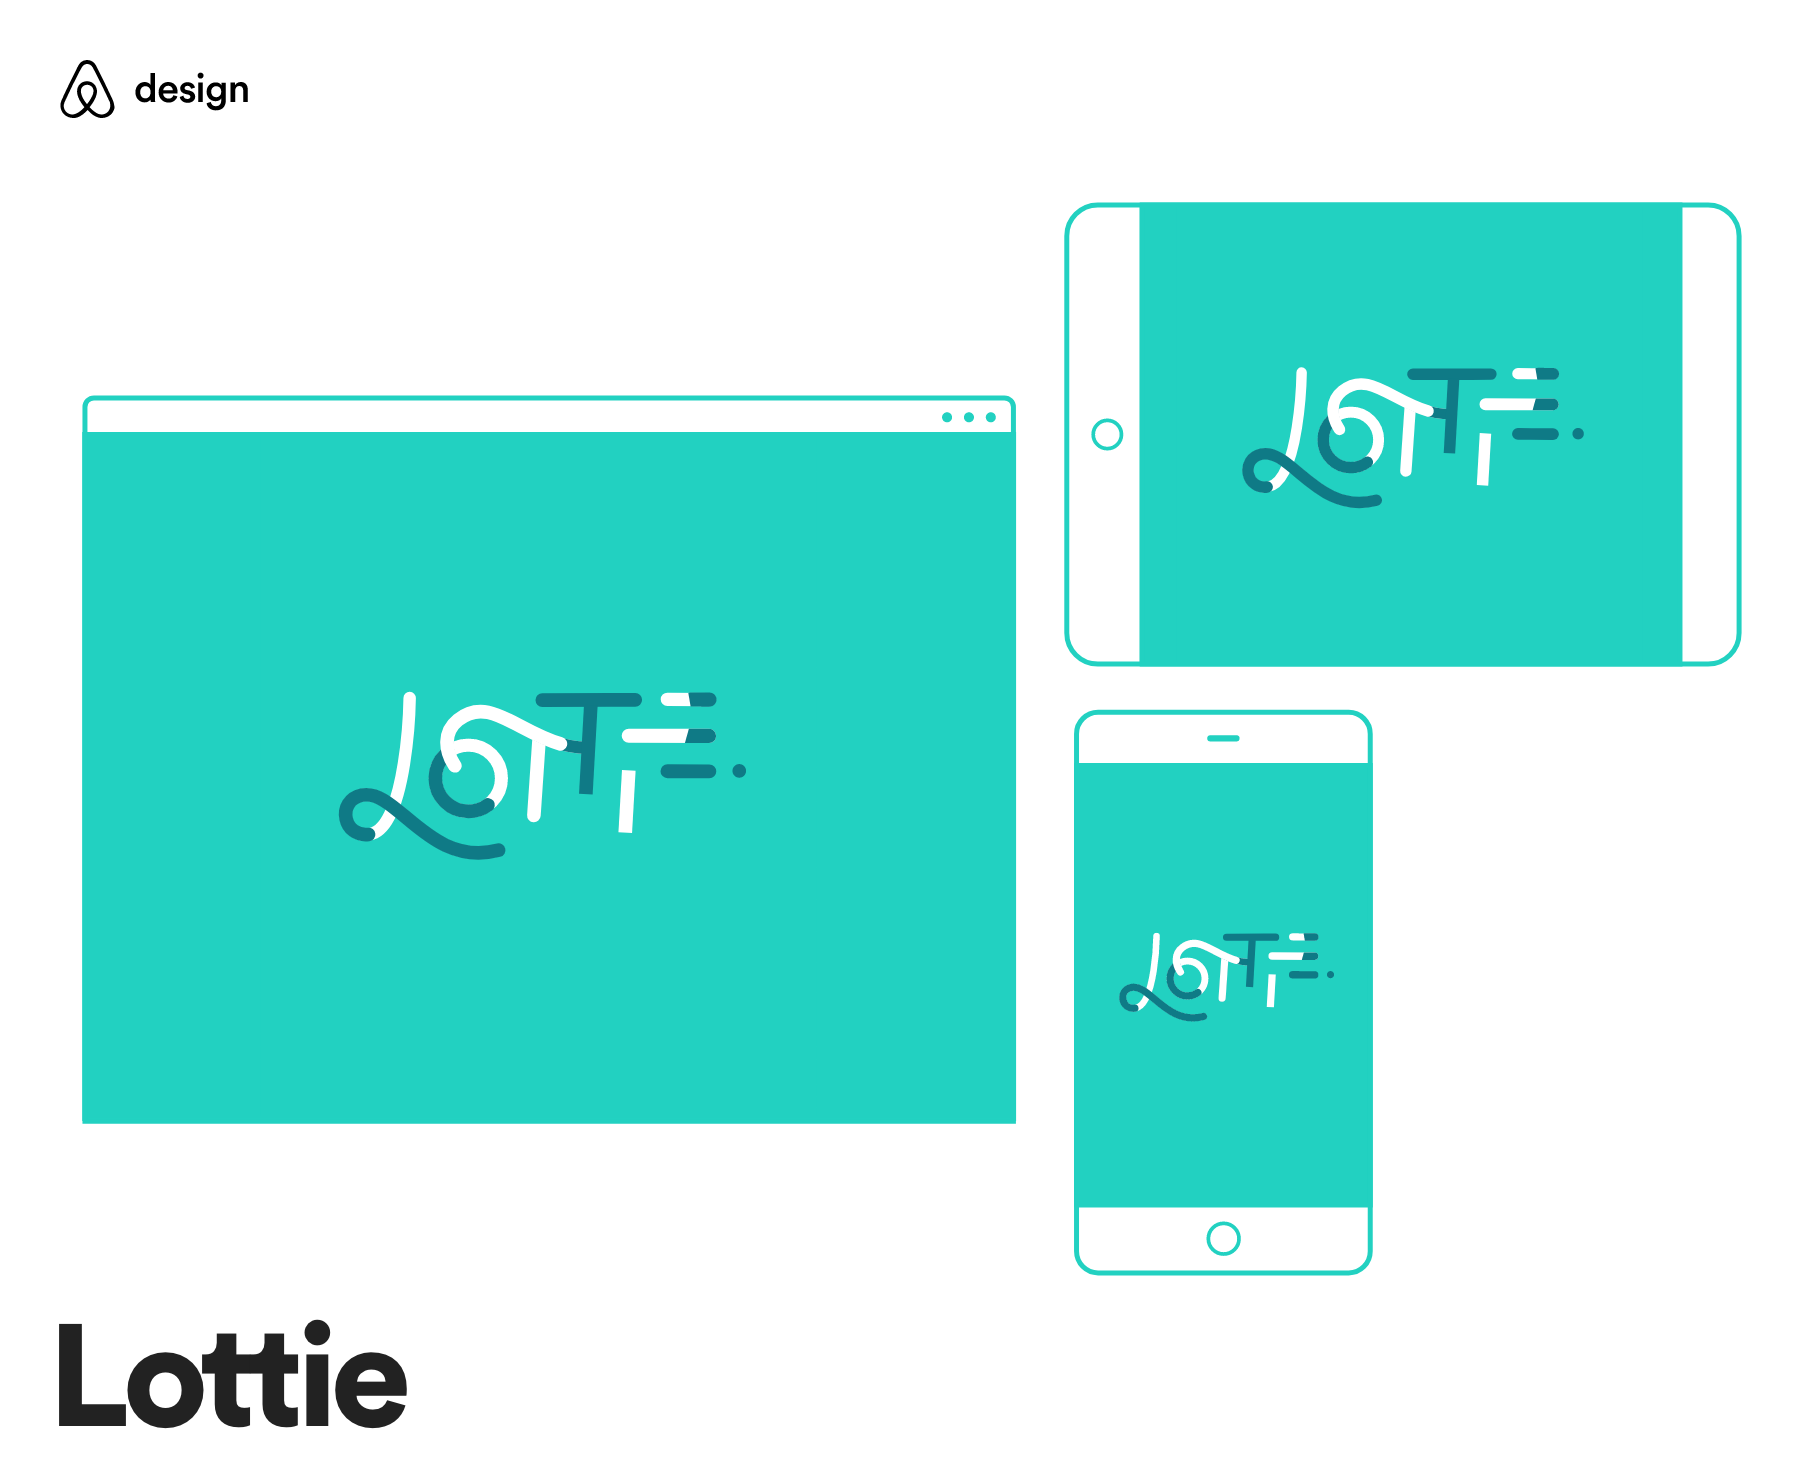 Lottie - Prototyping tool by Airbnb — Divergent Thinking